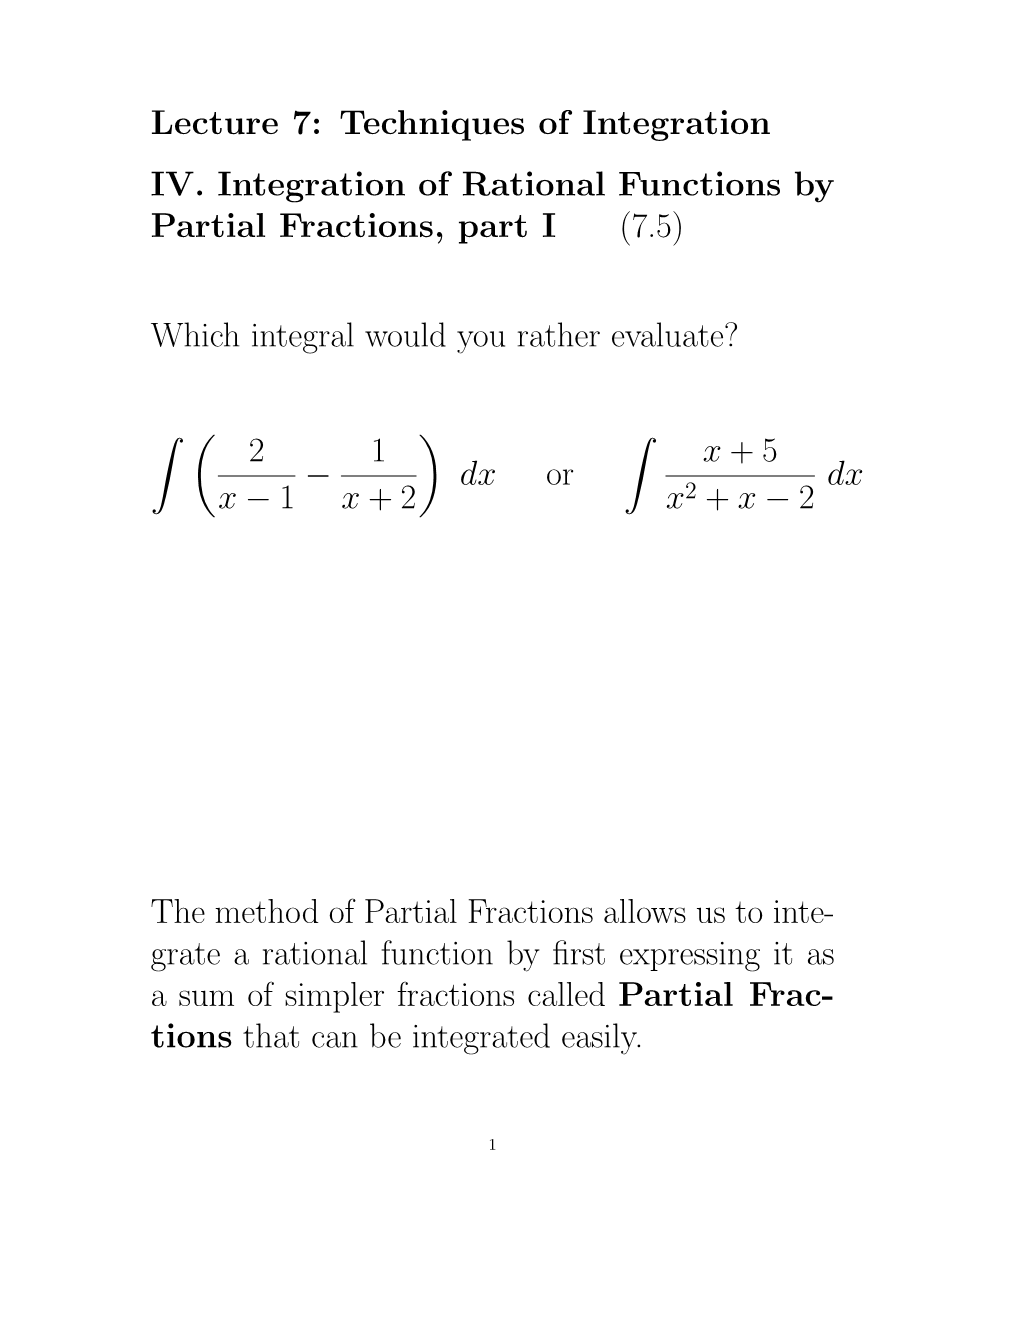 Lecture 7: Techniques of Integration IV. Integration of Rational Functions by Partial Fractions, Part I (7.5)